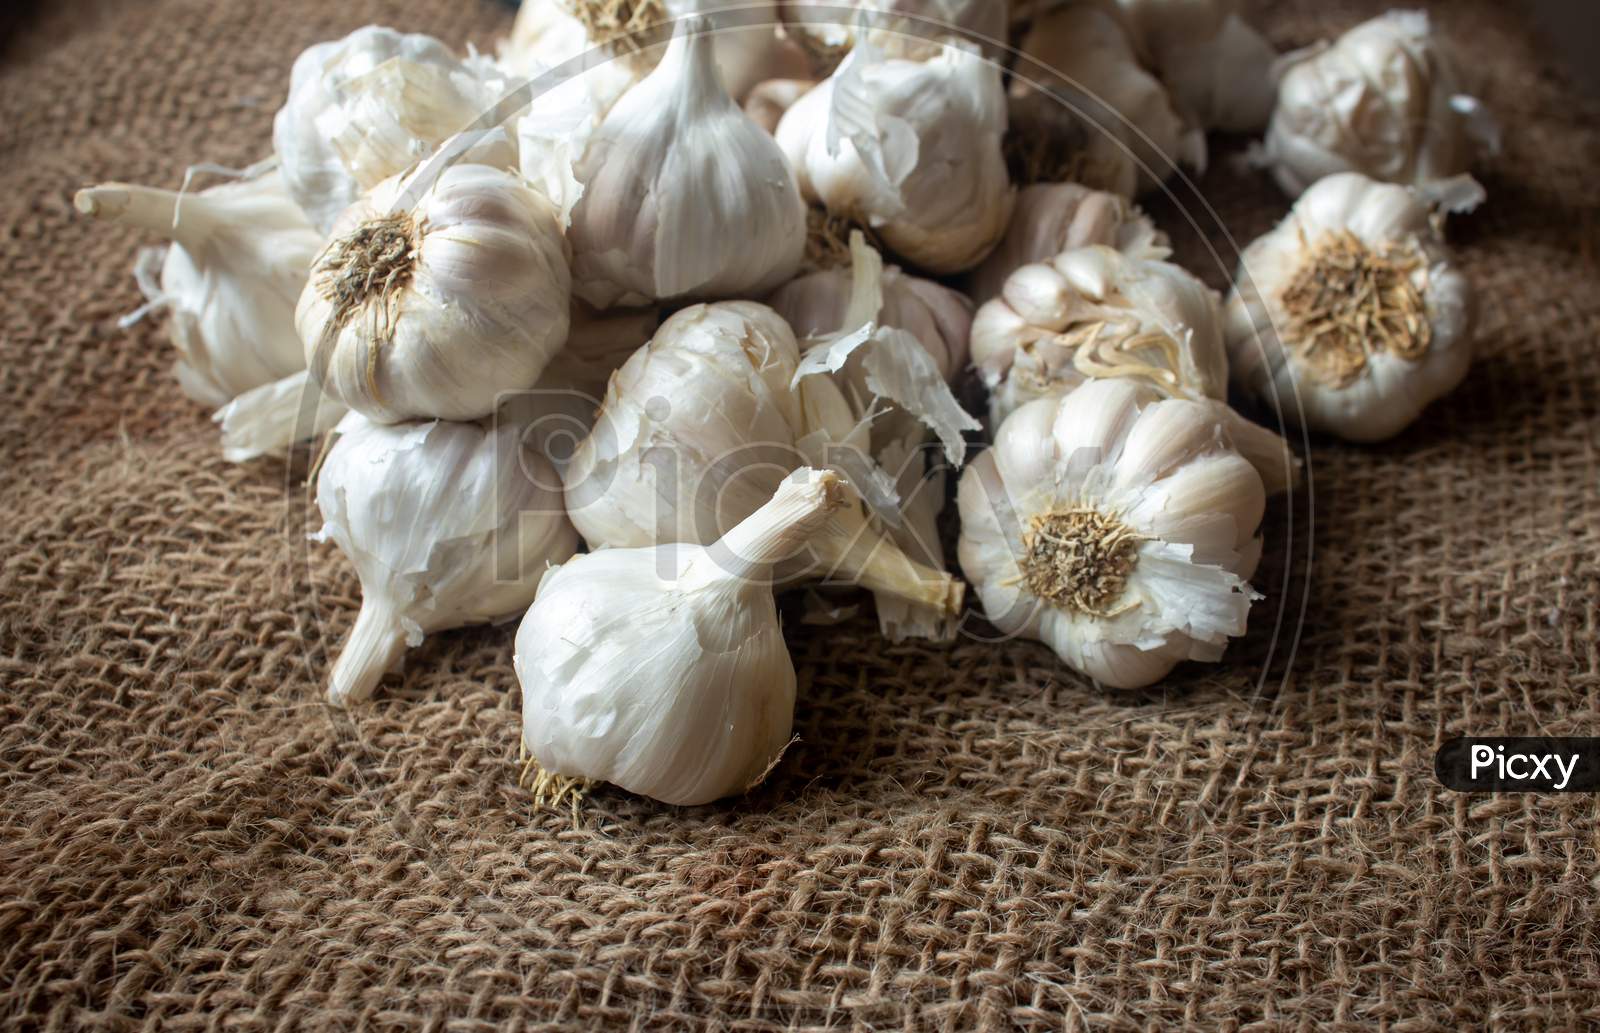 View Of Whole Garlic Bulbs. Garlic Helps Build Immunity Against Cold And Flu.